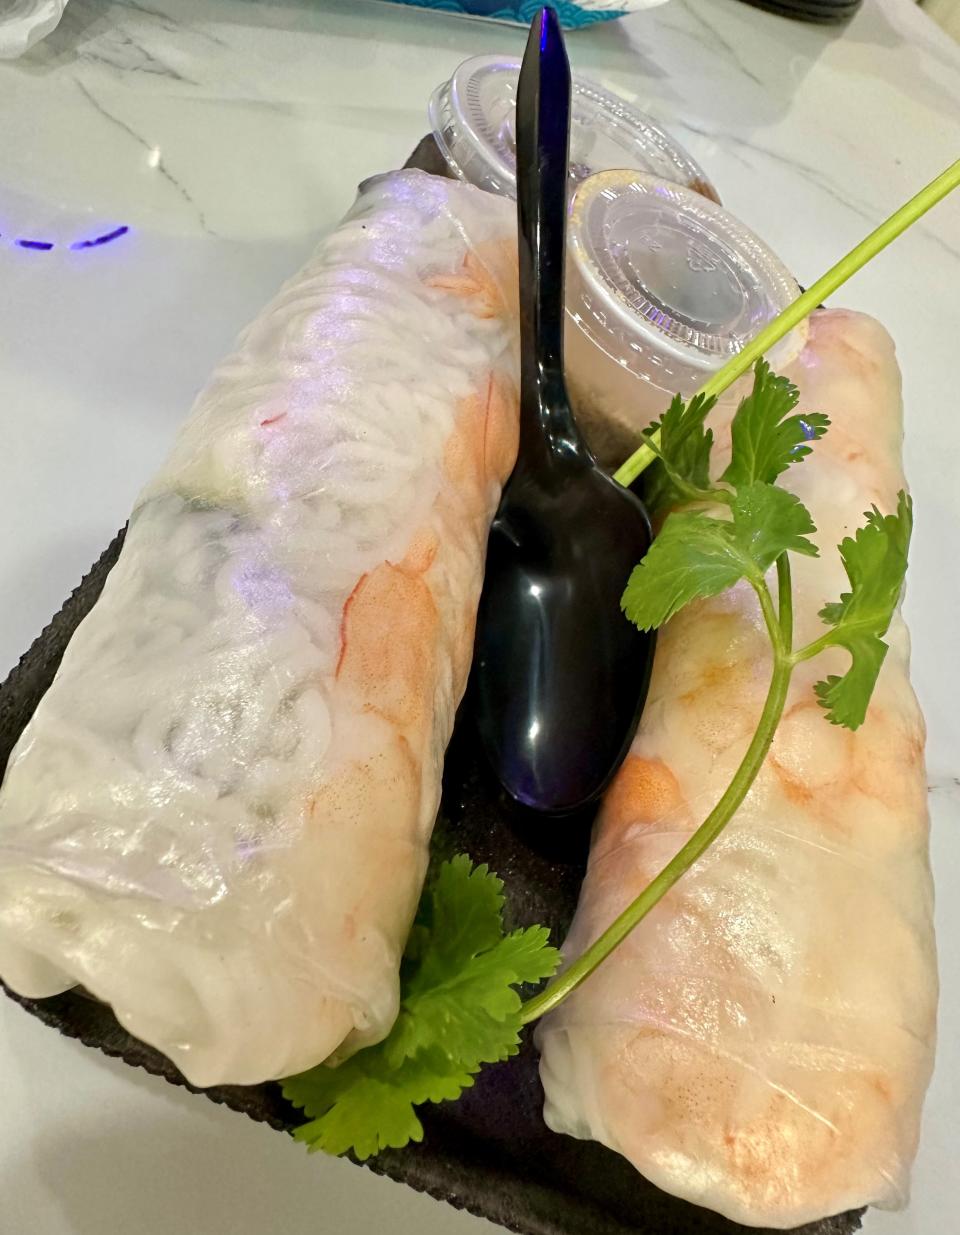 Food writer Lyn Dowling, on Saigon Baguette: "Best first: The shrimp spring rolls excelled in every way in flavor and texture."